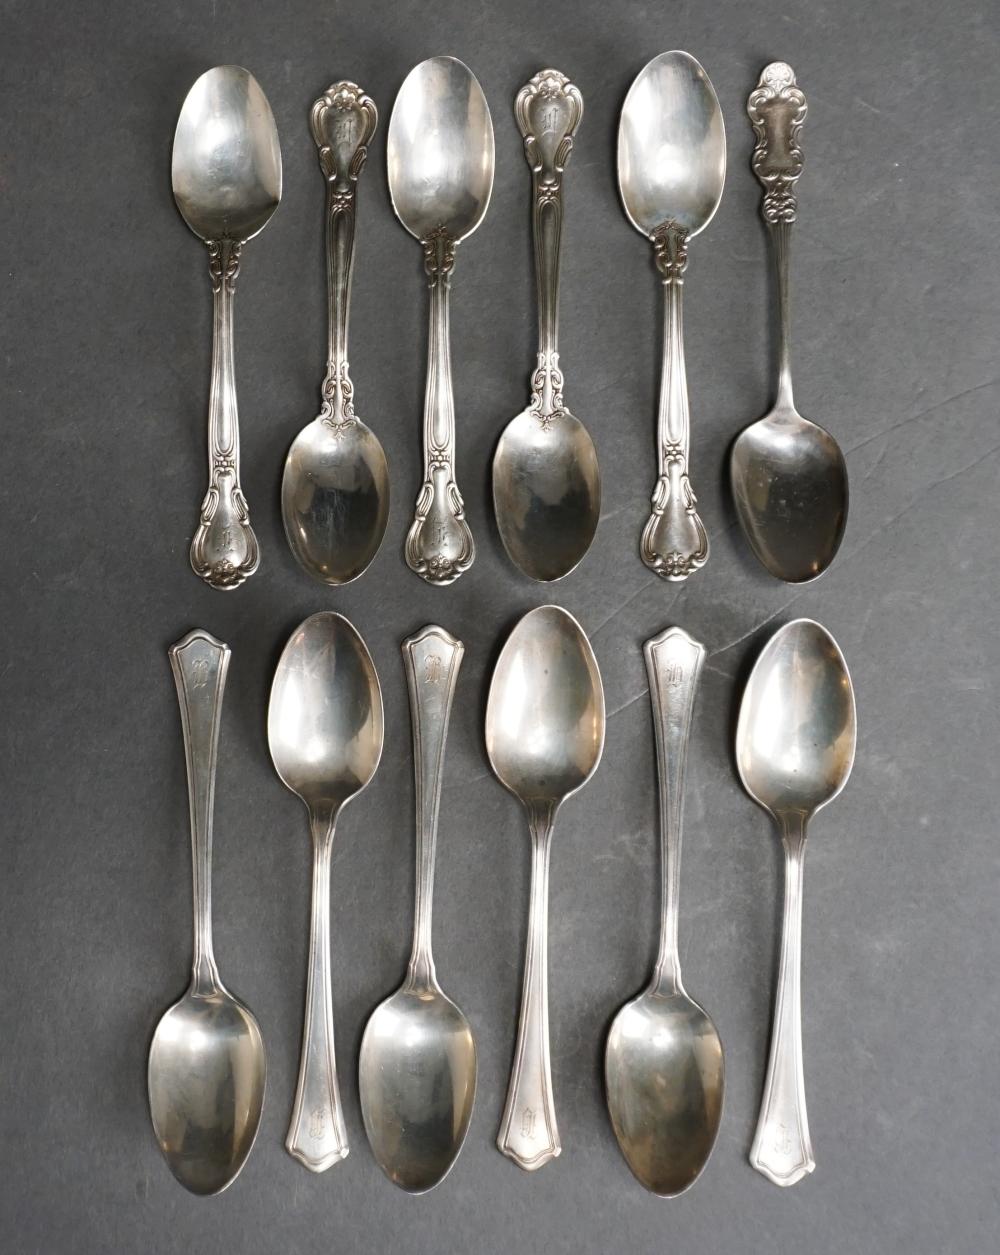 GROUP WITH 12 AMERICAN STERLING 32da08